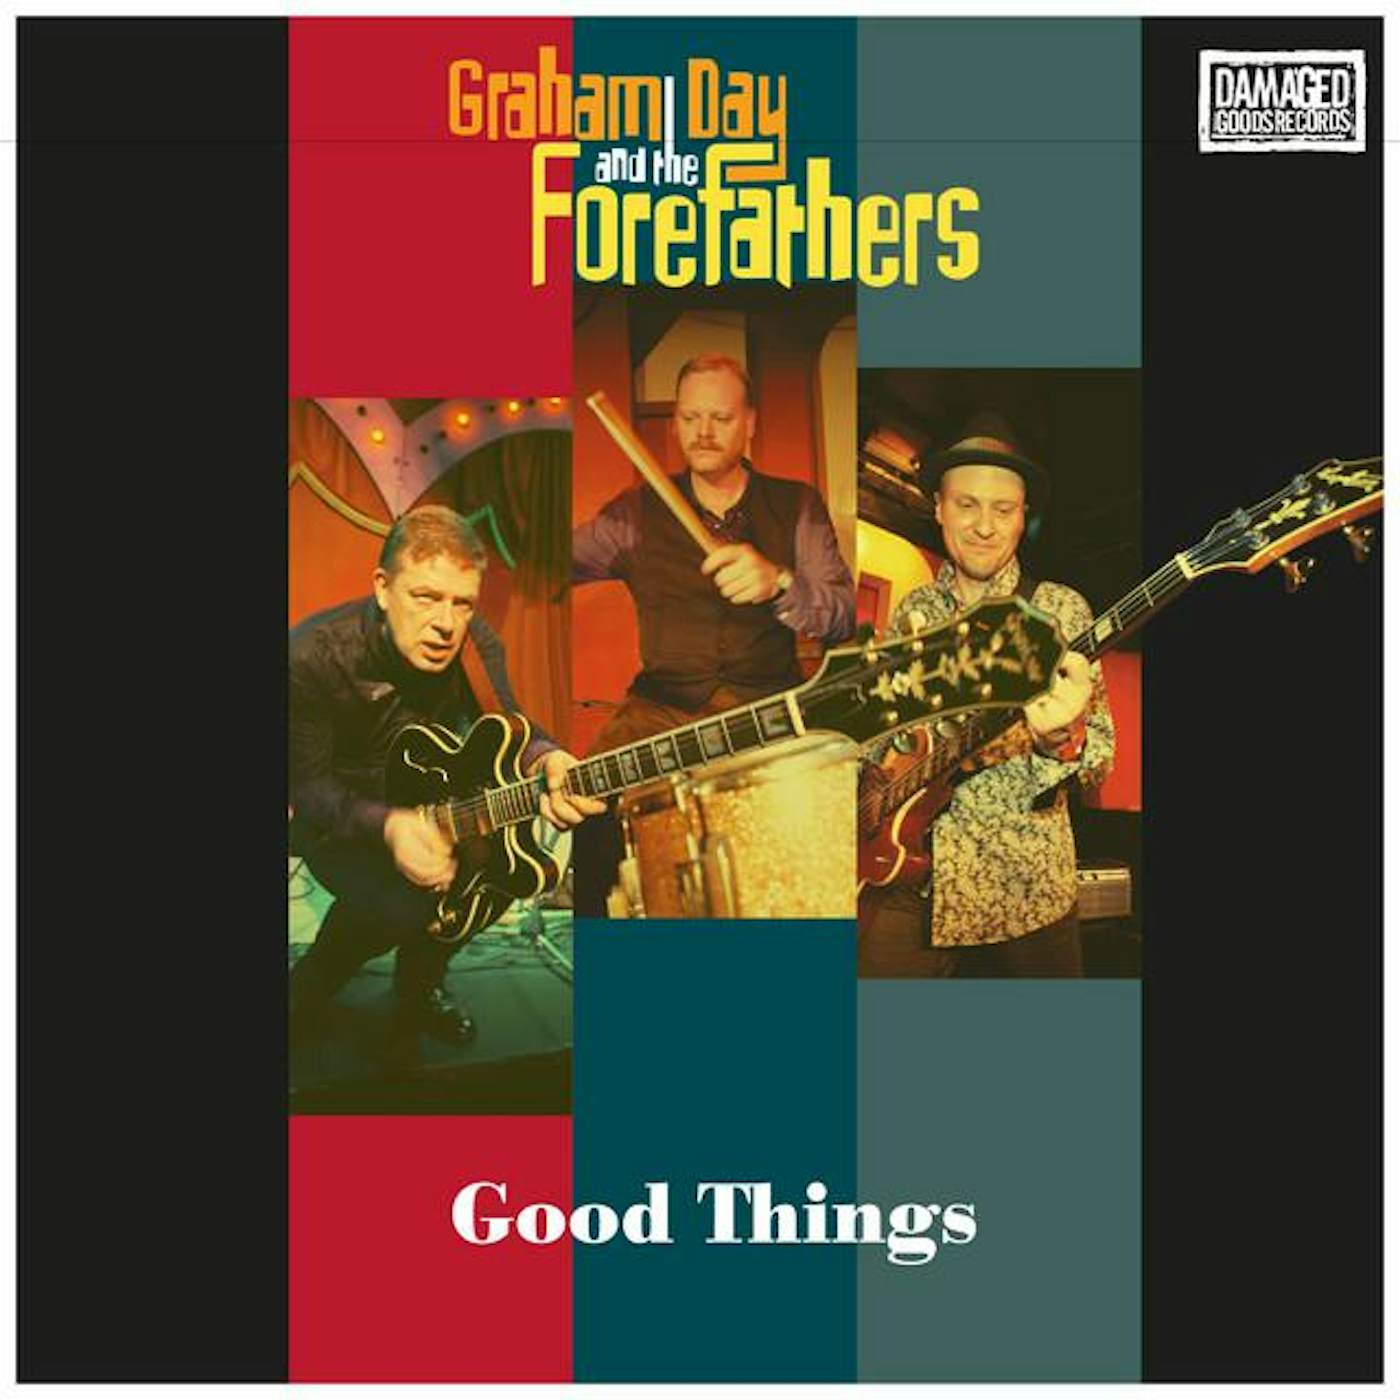 Graham Day and The Forefathers